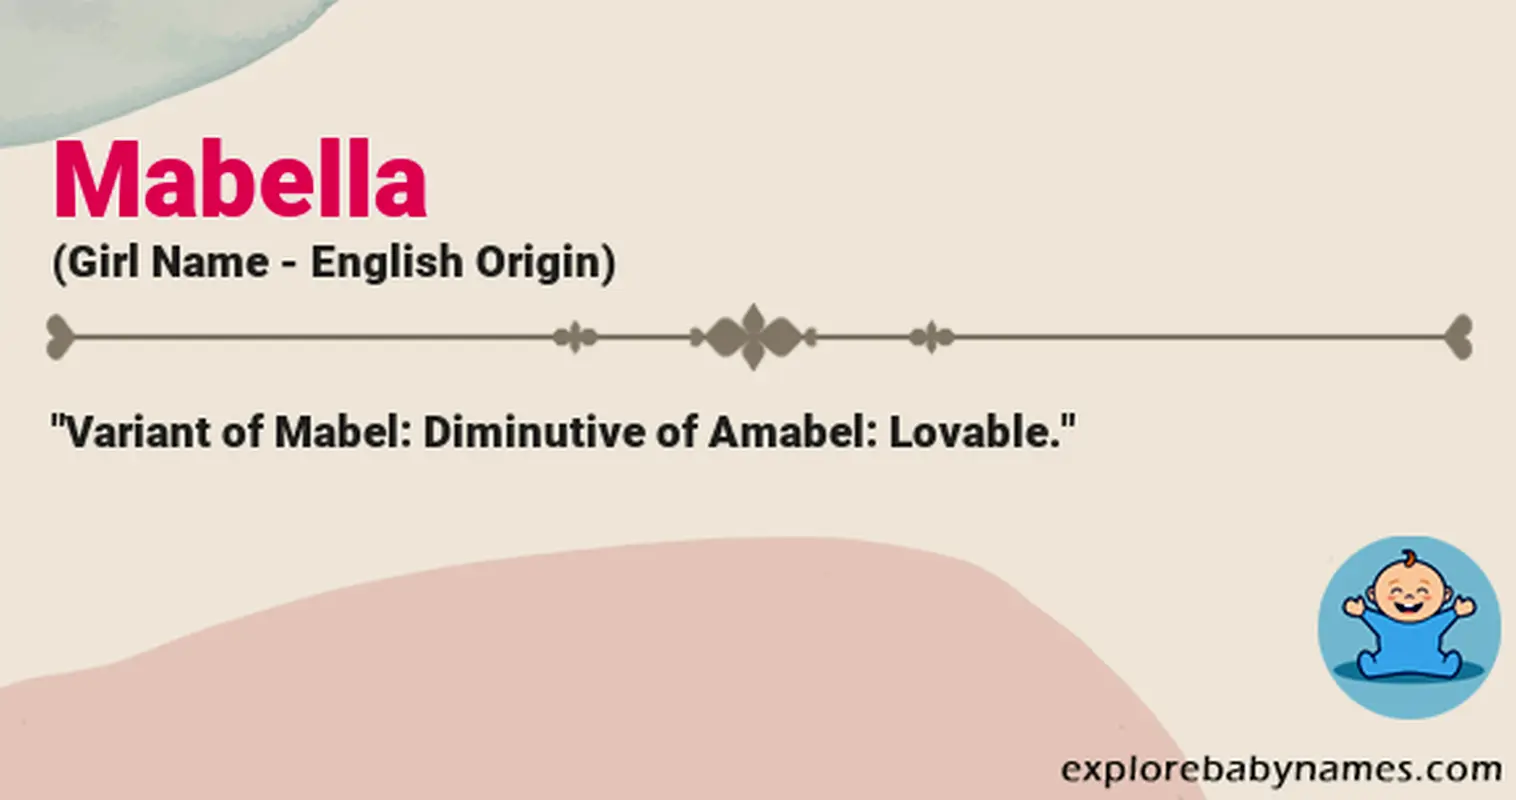 Meaning of Mabella